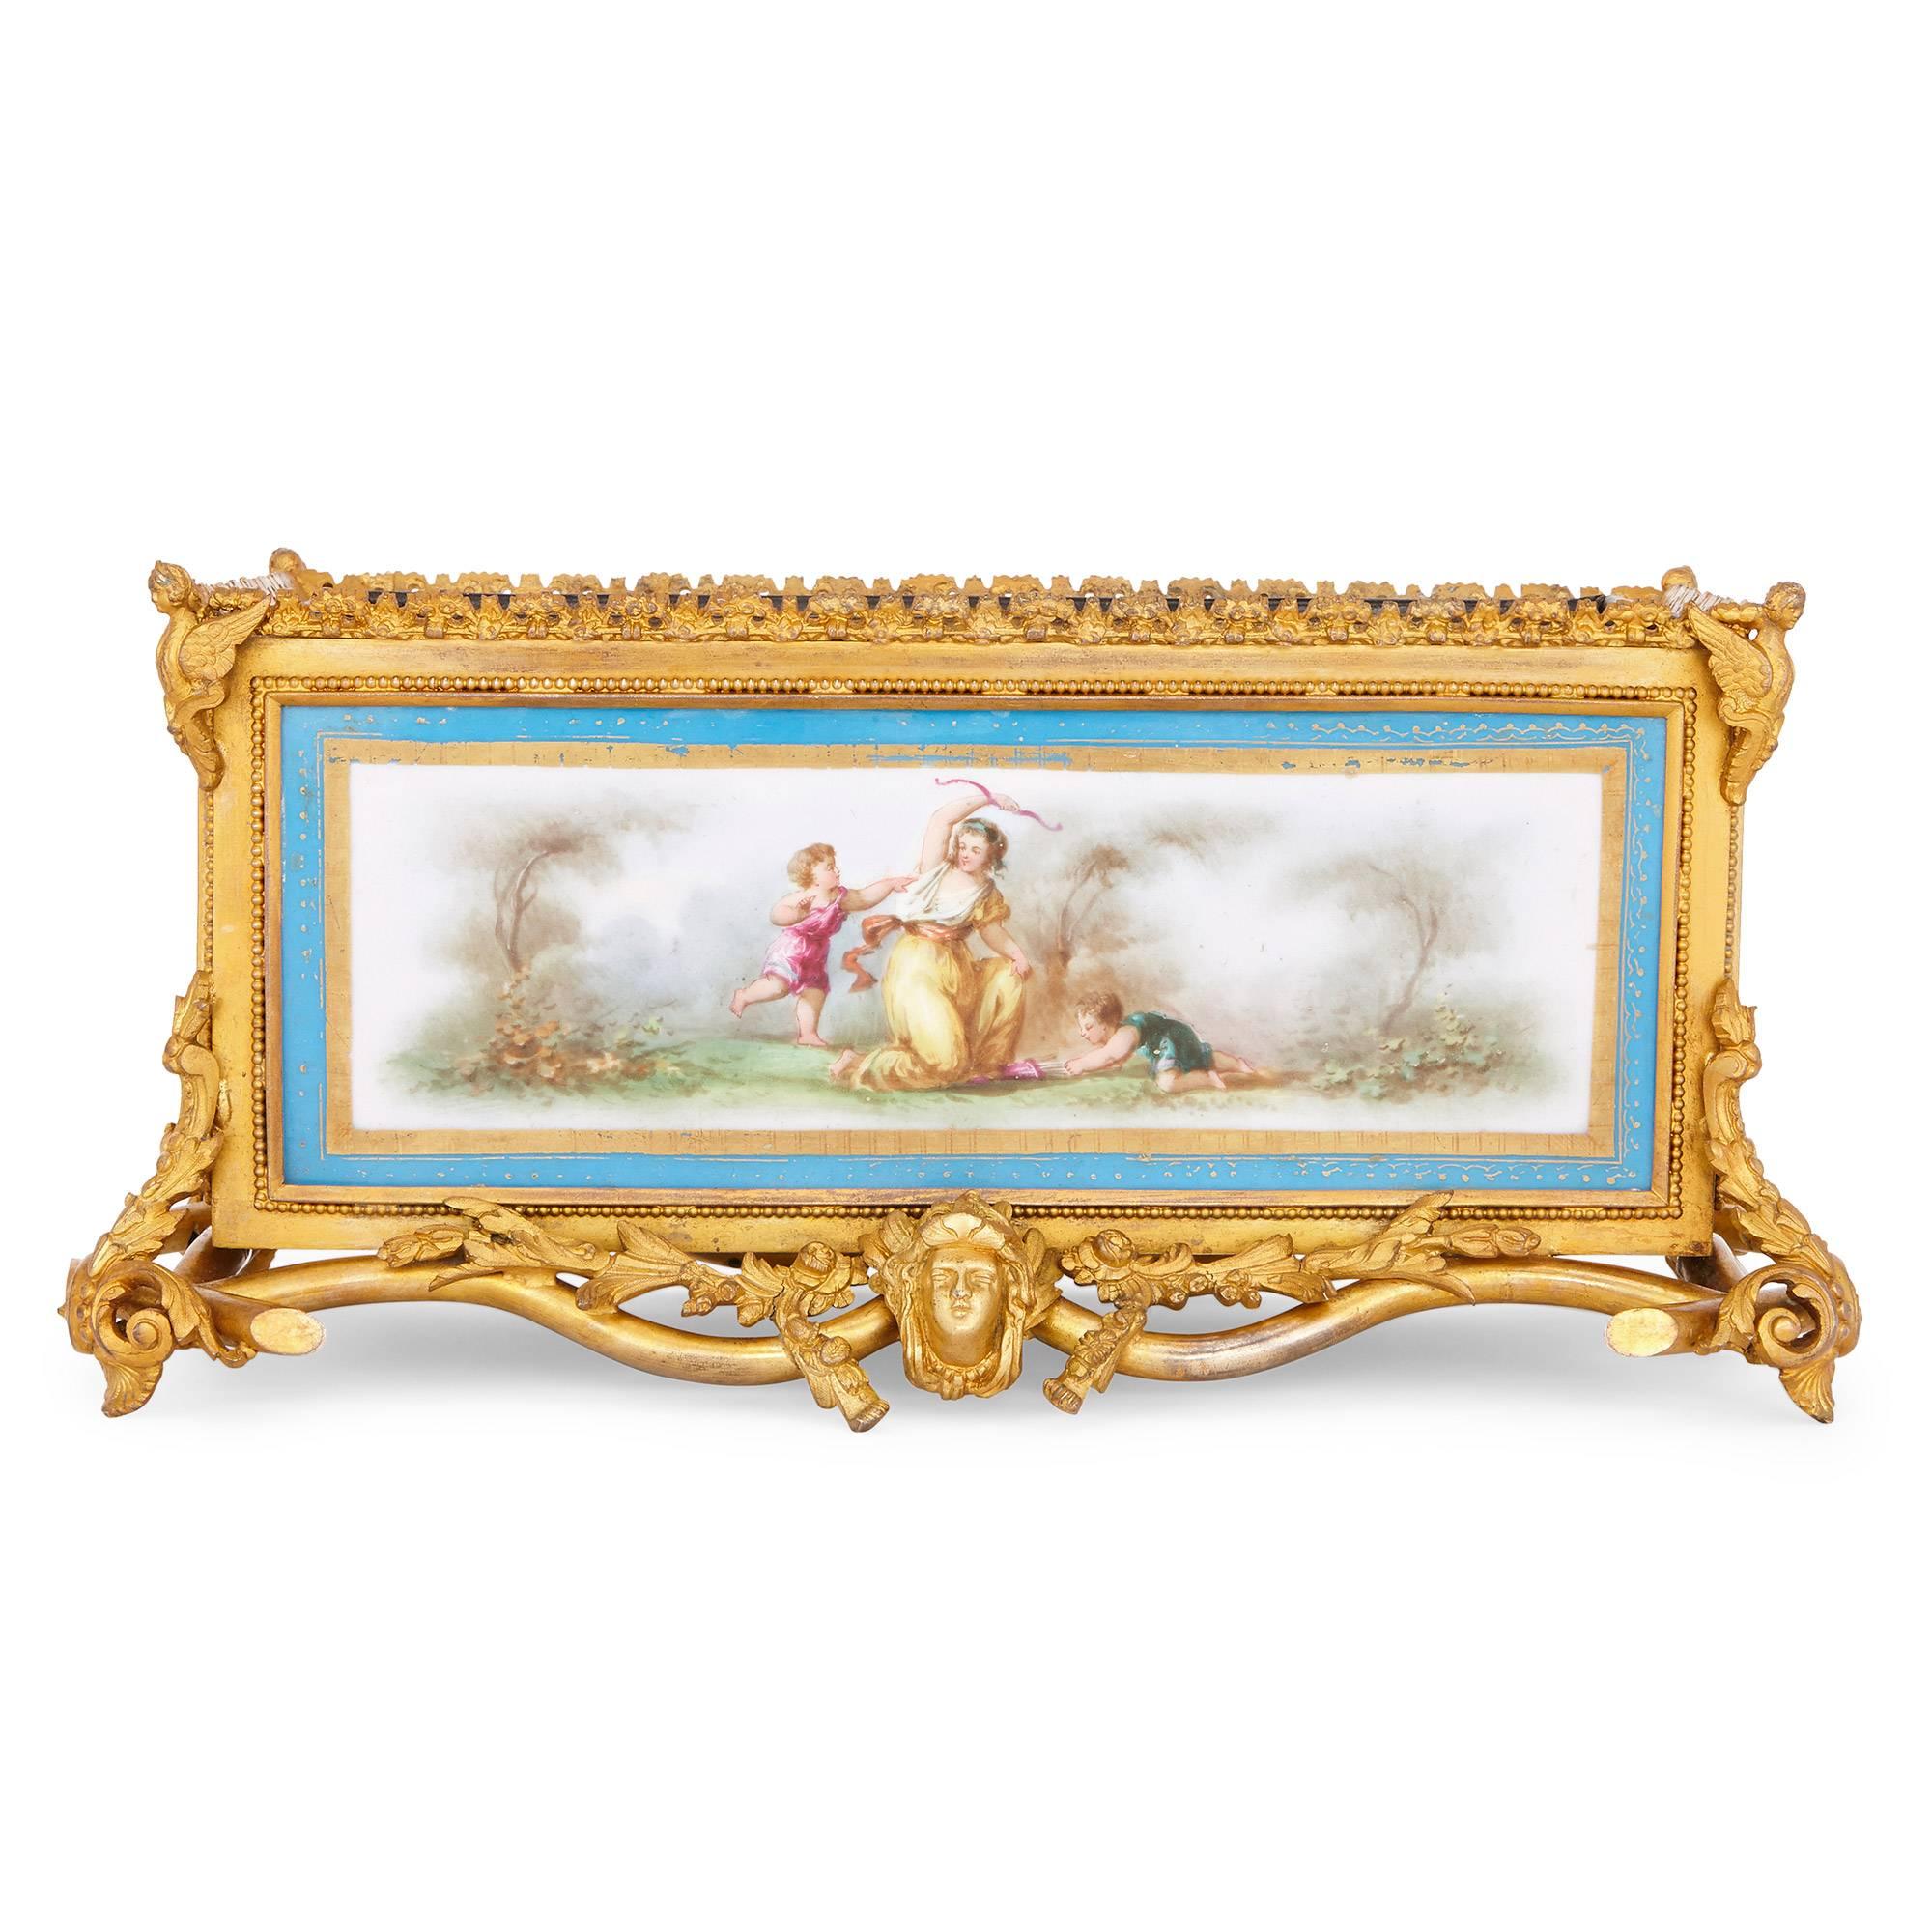 This beautiful French antique jardiniere features intricate gilt bronze mounts and four Sevres style porcelain plaques. The base of the jardiniere is particularly ornate: crafted from cast and punctured gilt bronze, it takes the form of scrolling